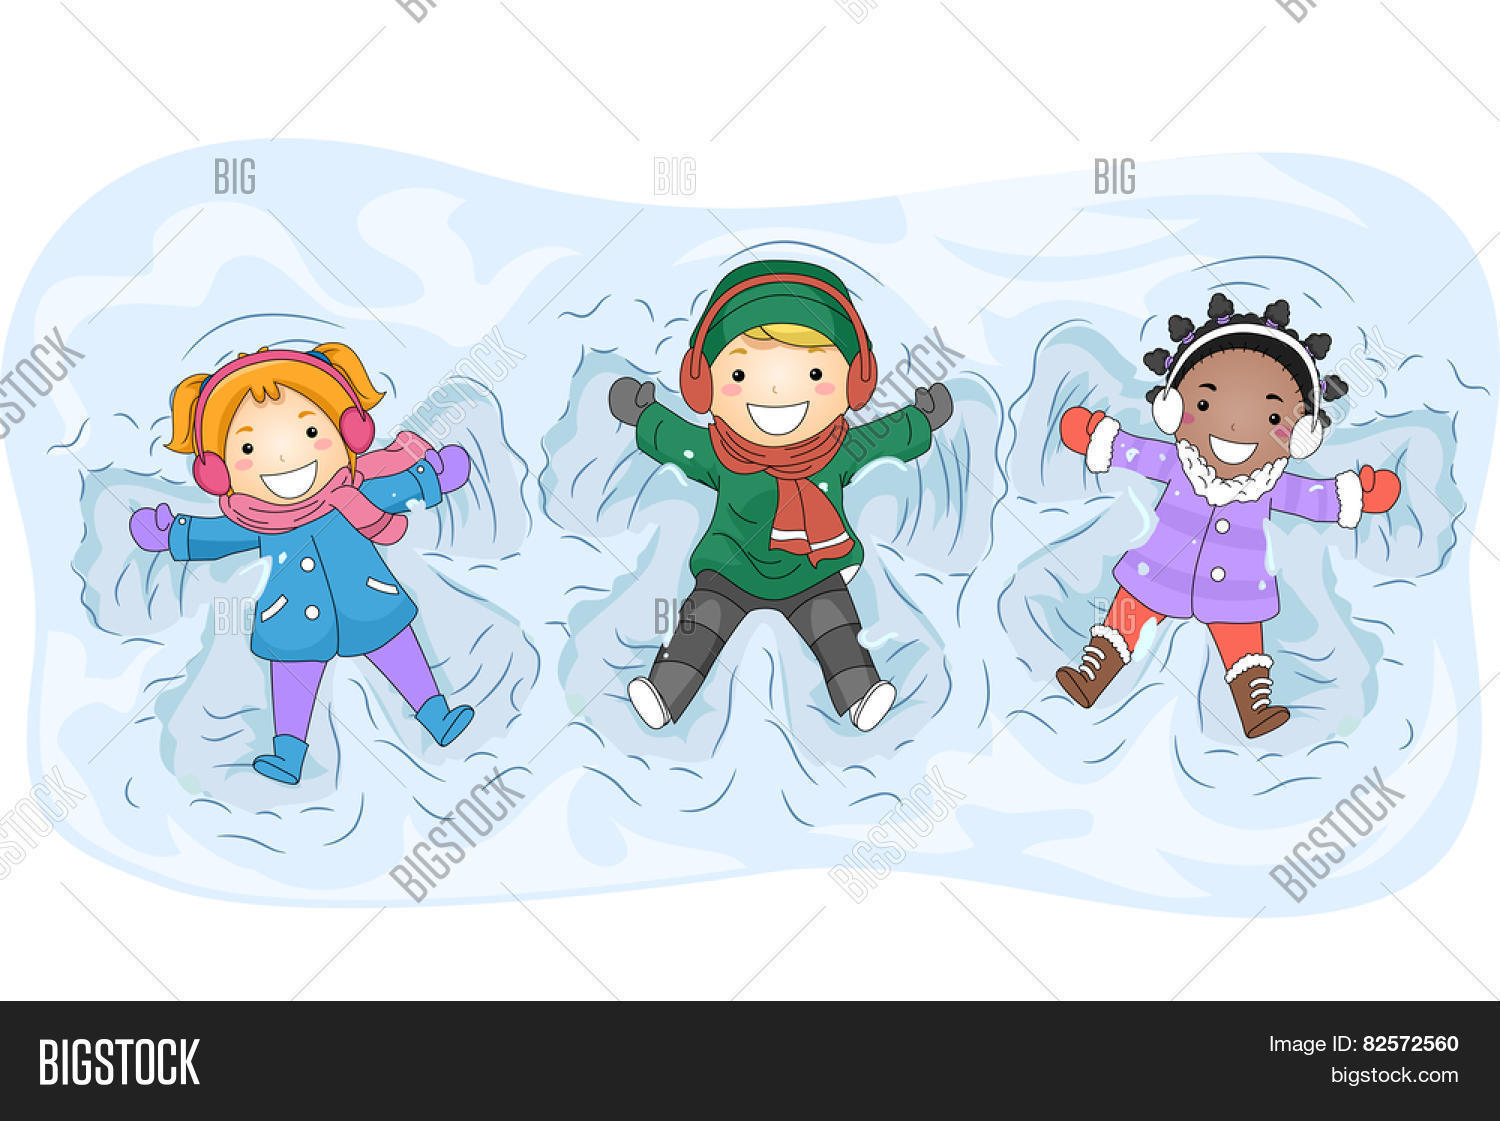 Illustration of Kids in Winter Gear Making Snow Angels Stock.